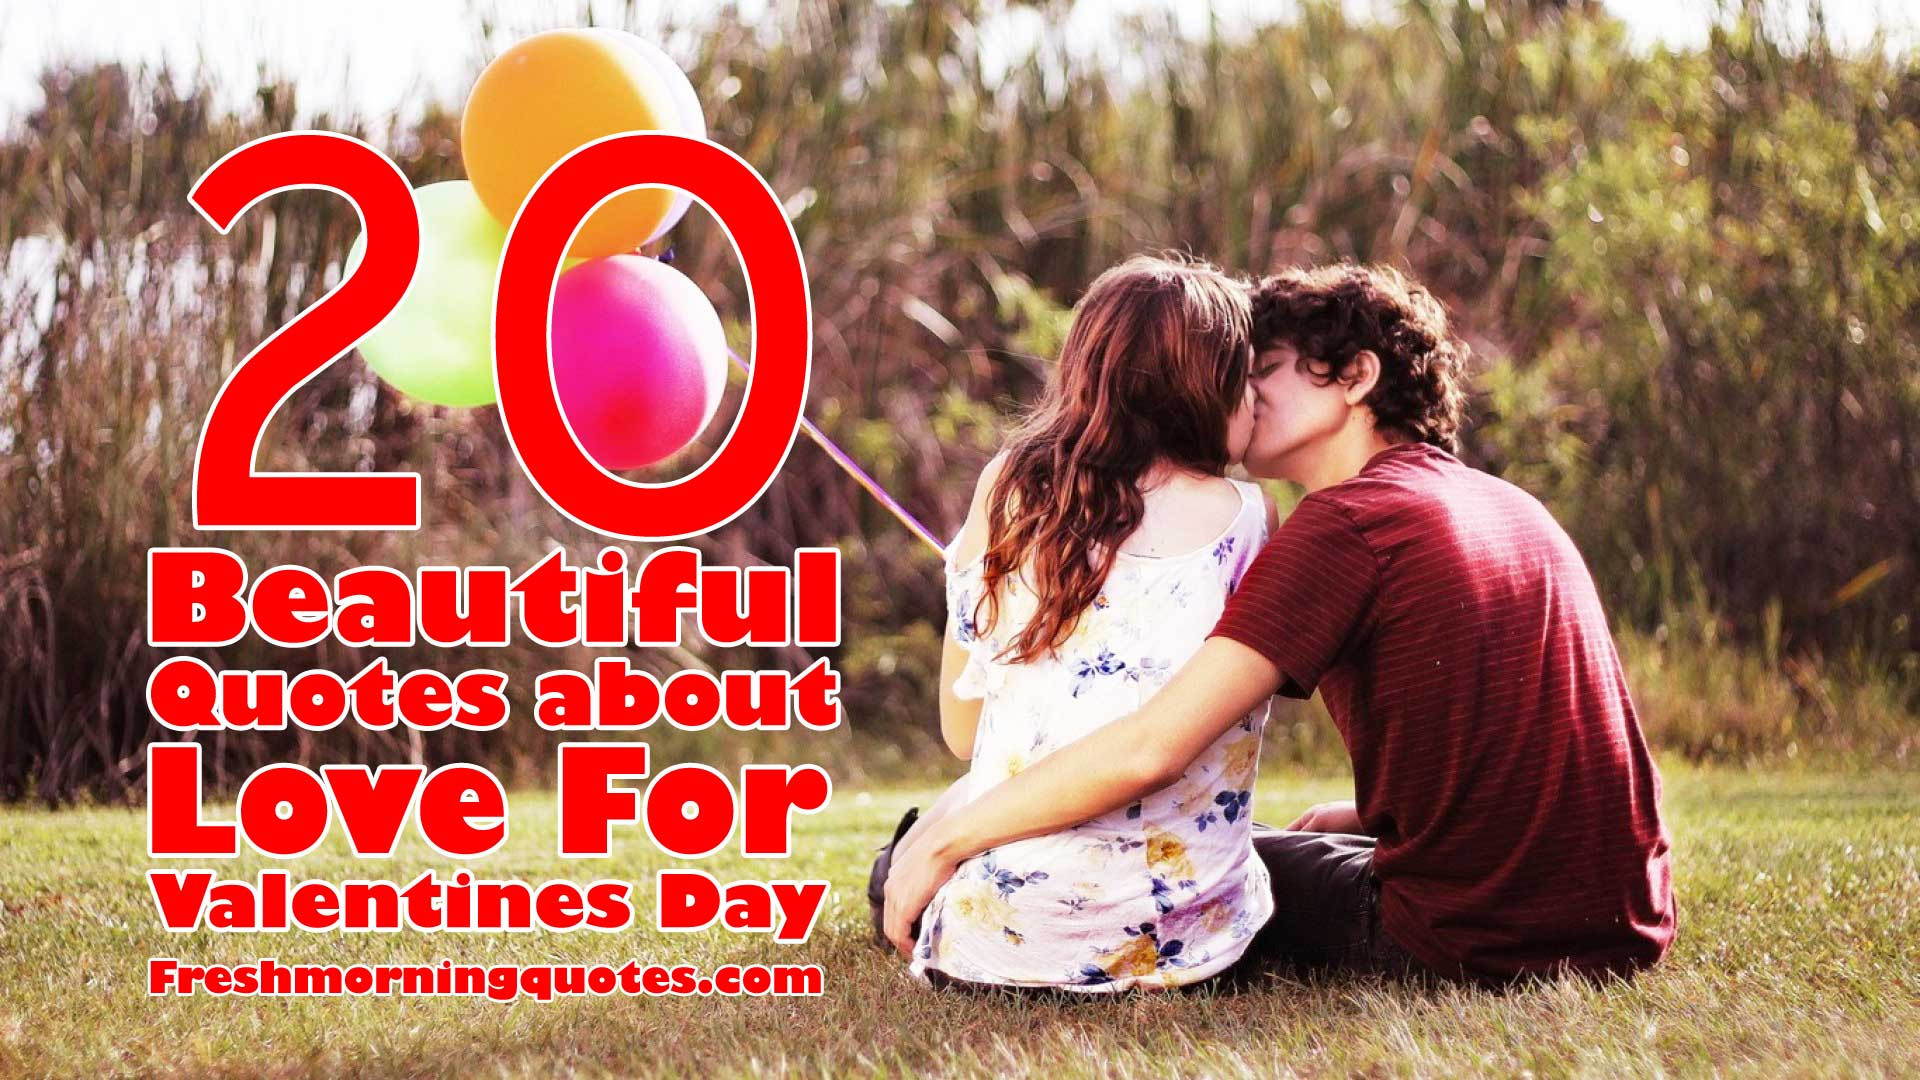 Love Quotes For Valentines Day
 20 Beautiful Quotes about Love for Valentines Day